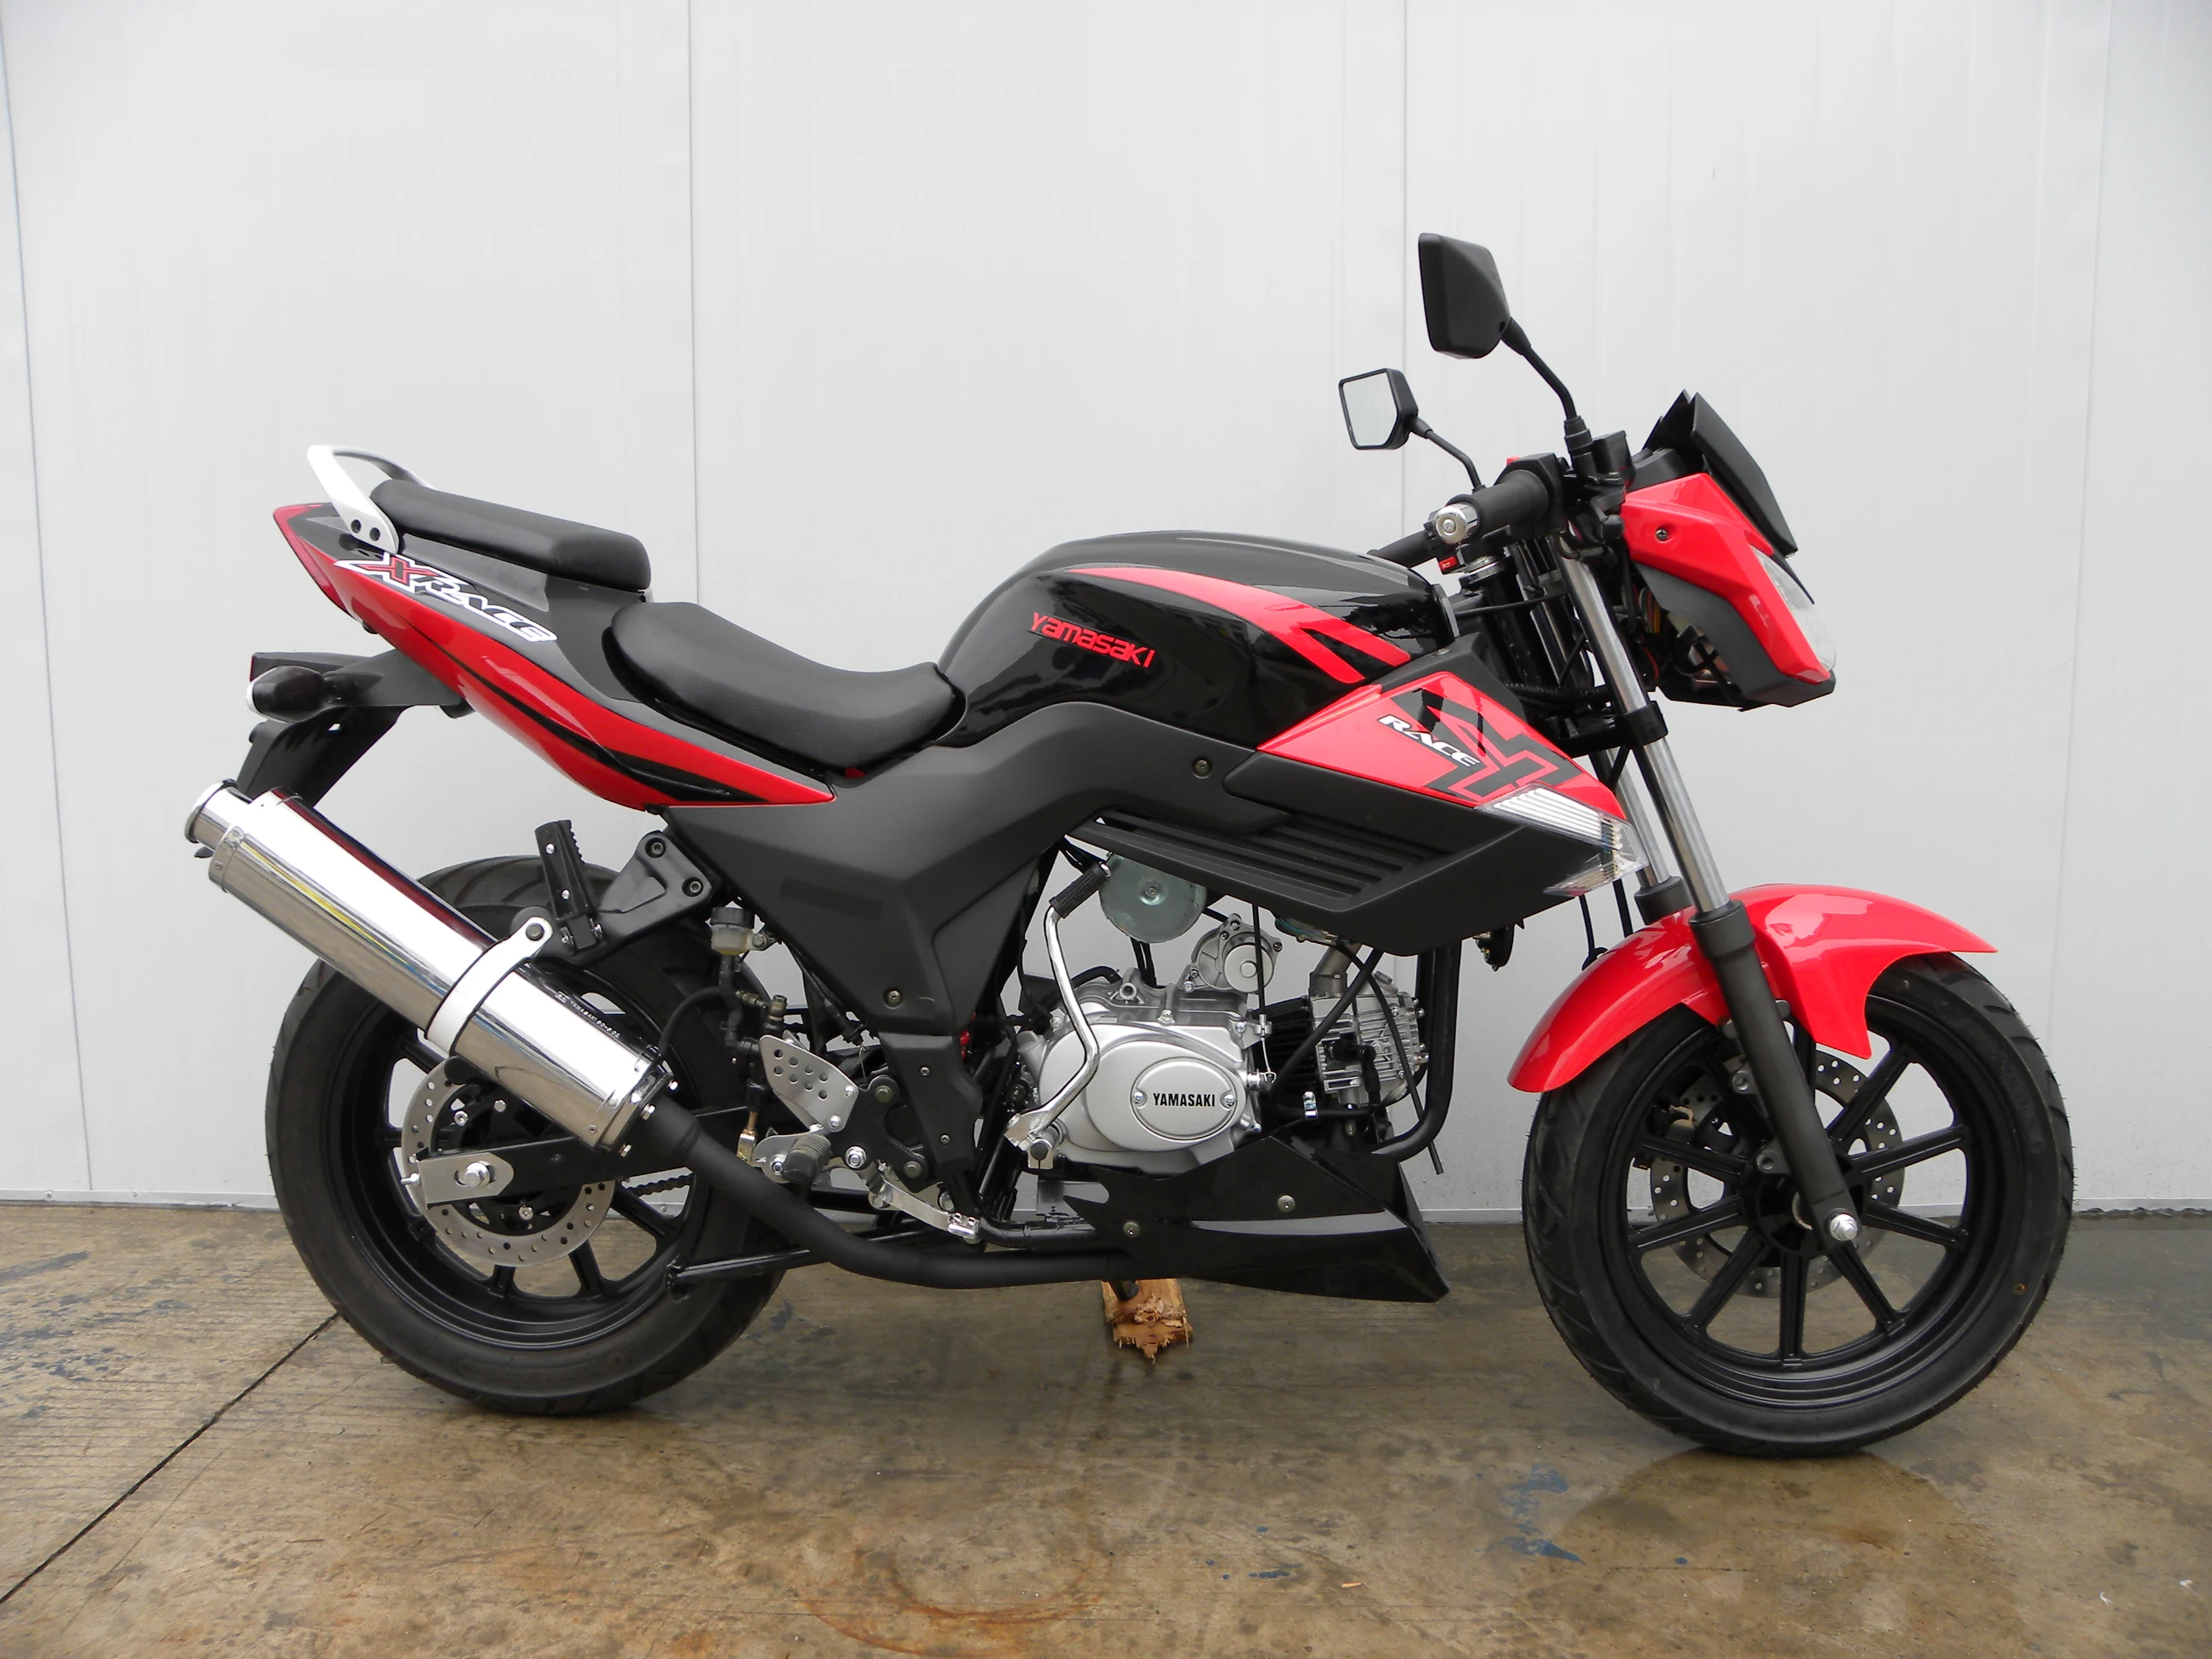 Automatic Motorcycle 50cc Street Bike Sports Motorcycle - Buy Automatic ...